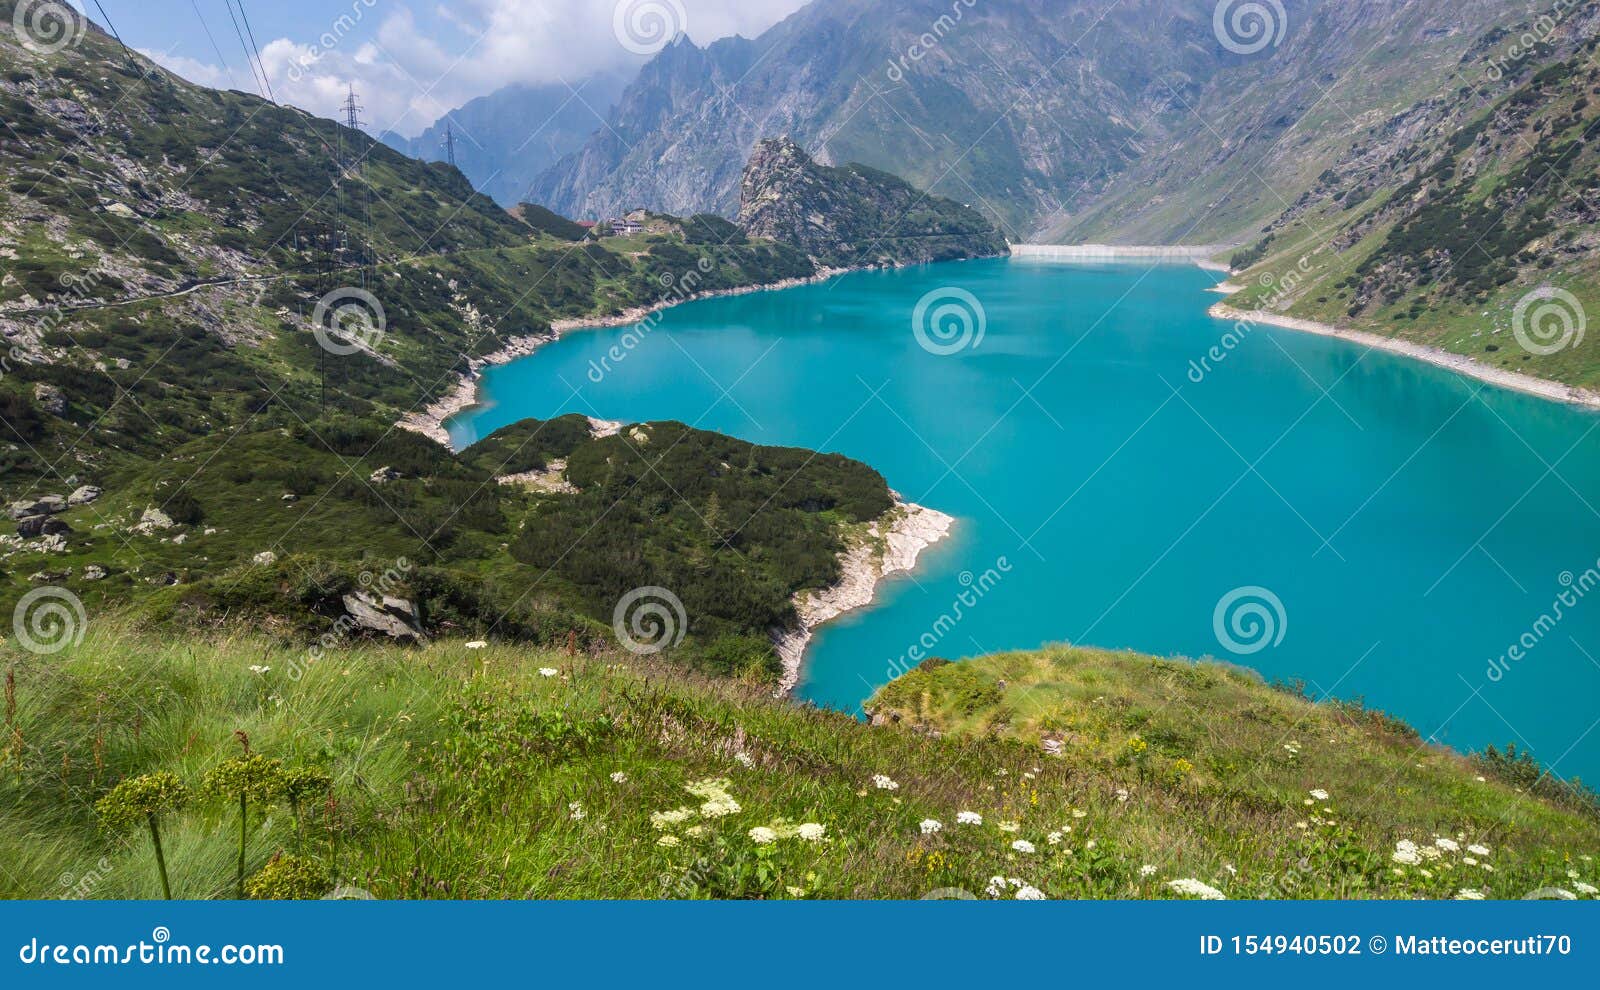 landscape of the lake barbellino an alpine artificial lake. turquoise water. italian alps. italy. orobie